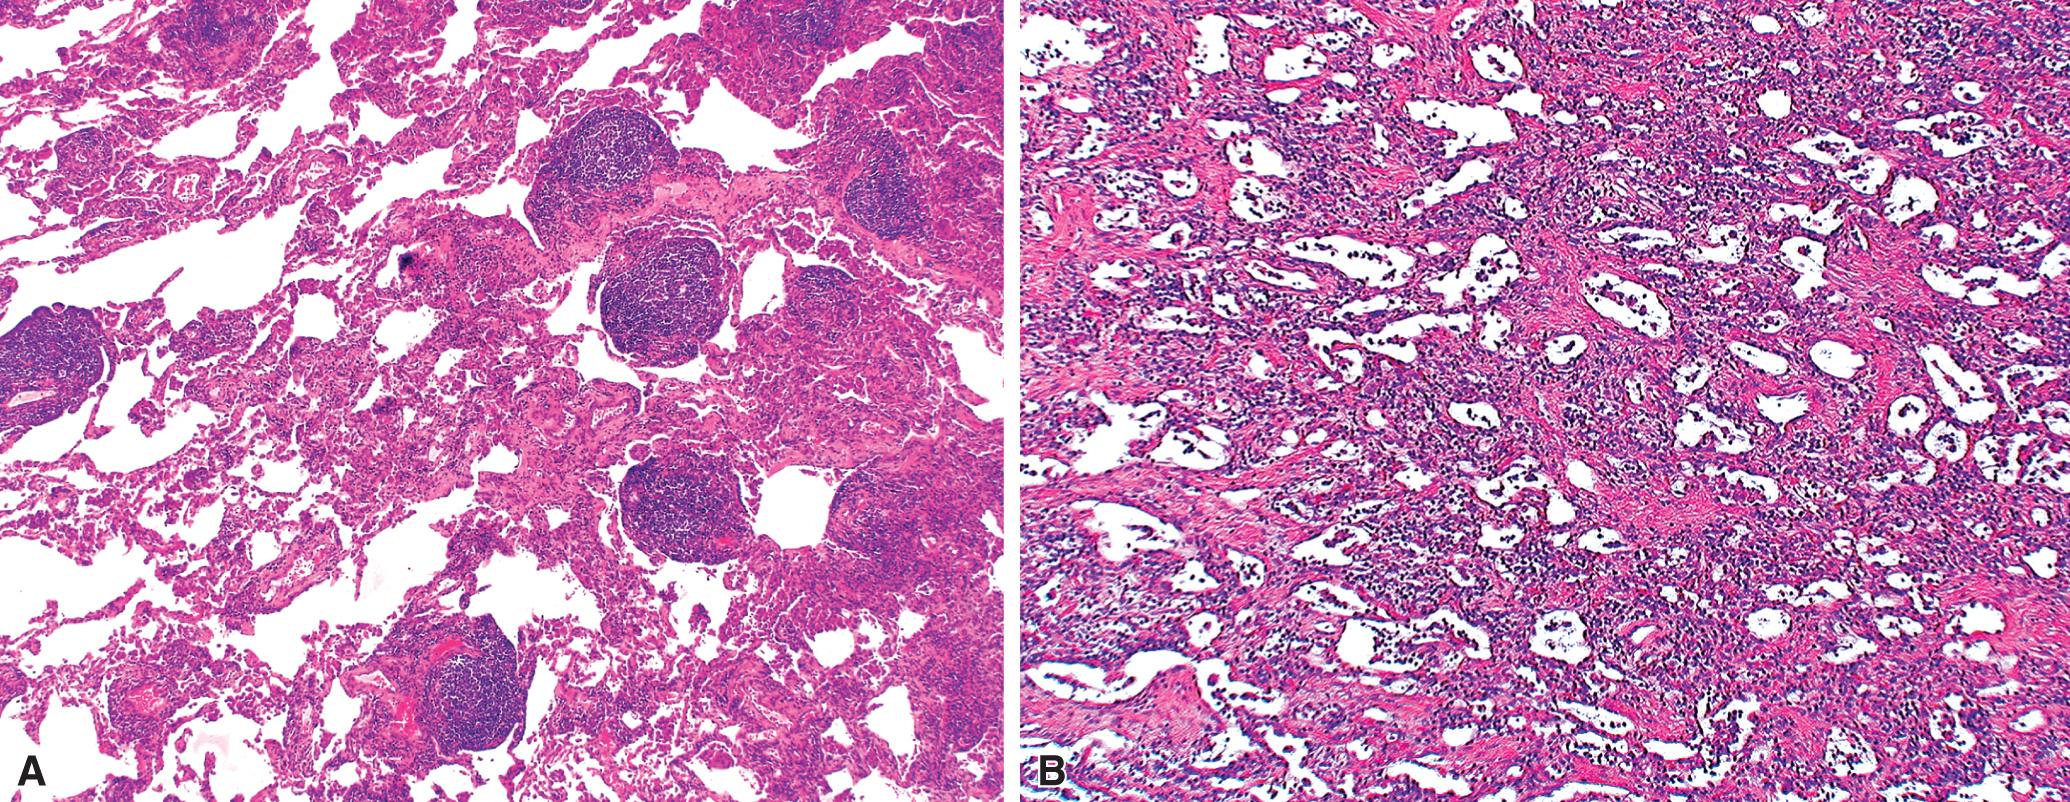 Figure 8.36, Rheumatoid arthritis (RA) lung disease. (A) Chronic inflammation typically manifests in RA lung as lymphoid aggregates and follicular lymphoid germinal centers. (B) A variably cellular chronic interstitial infiltrate rich in plasma cells and lymphocytes is typical.